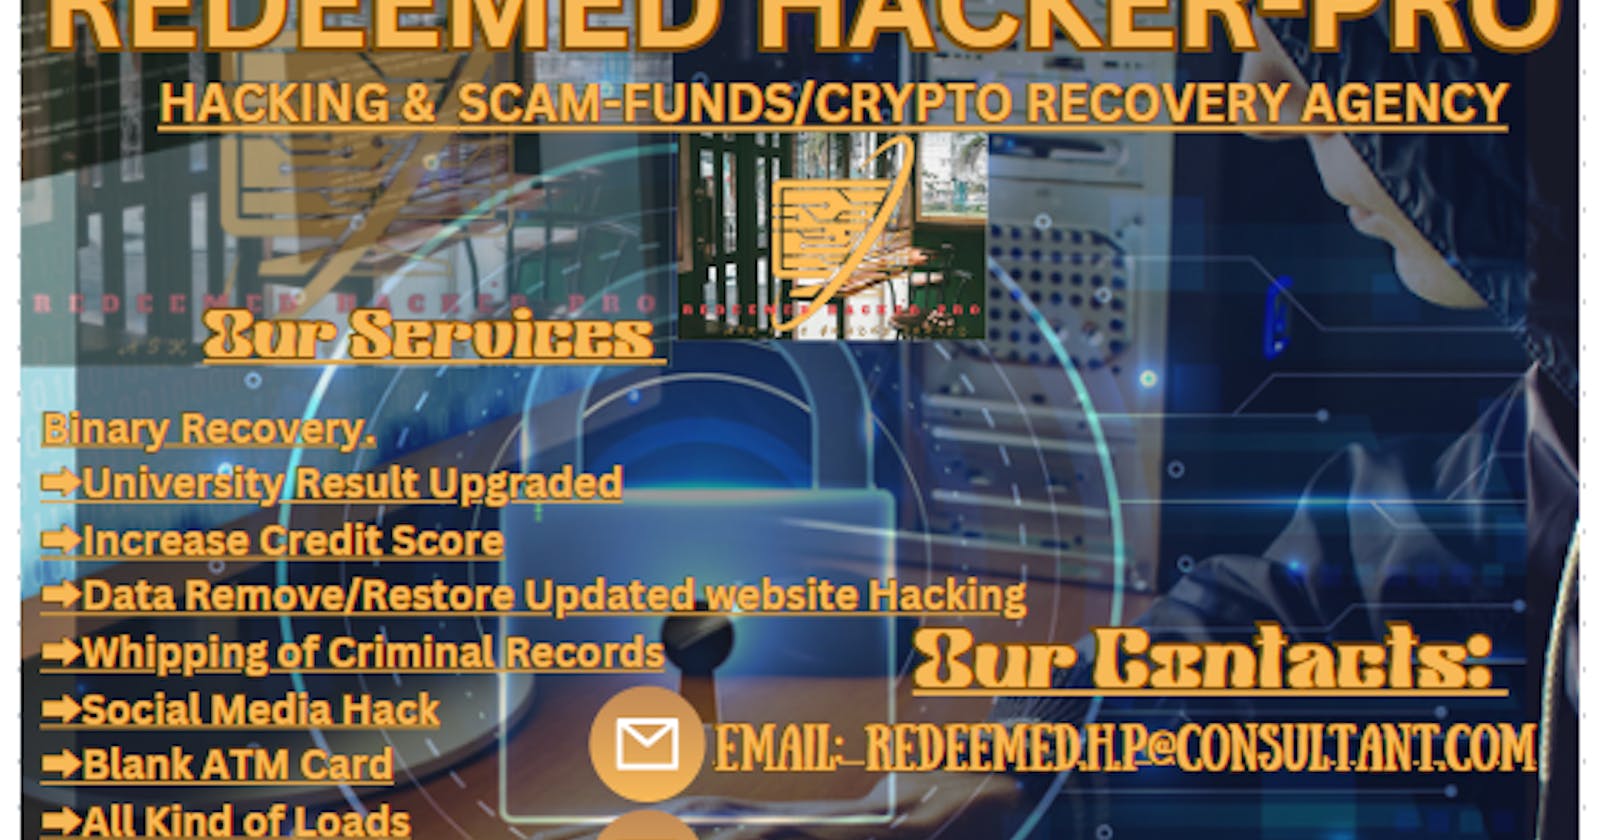 Working with Redeemed Hacker Pro for a few hours to my greatest Surprise they were able to recover back all my lost Funds/Crypto.